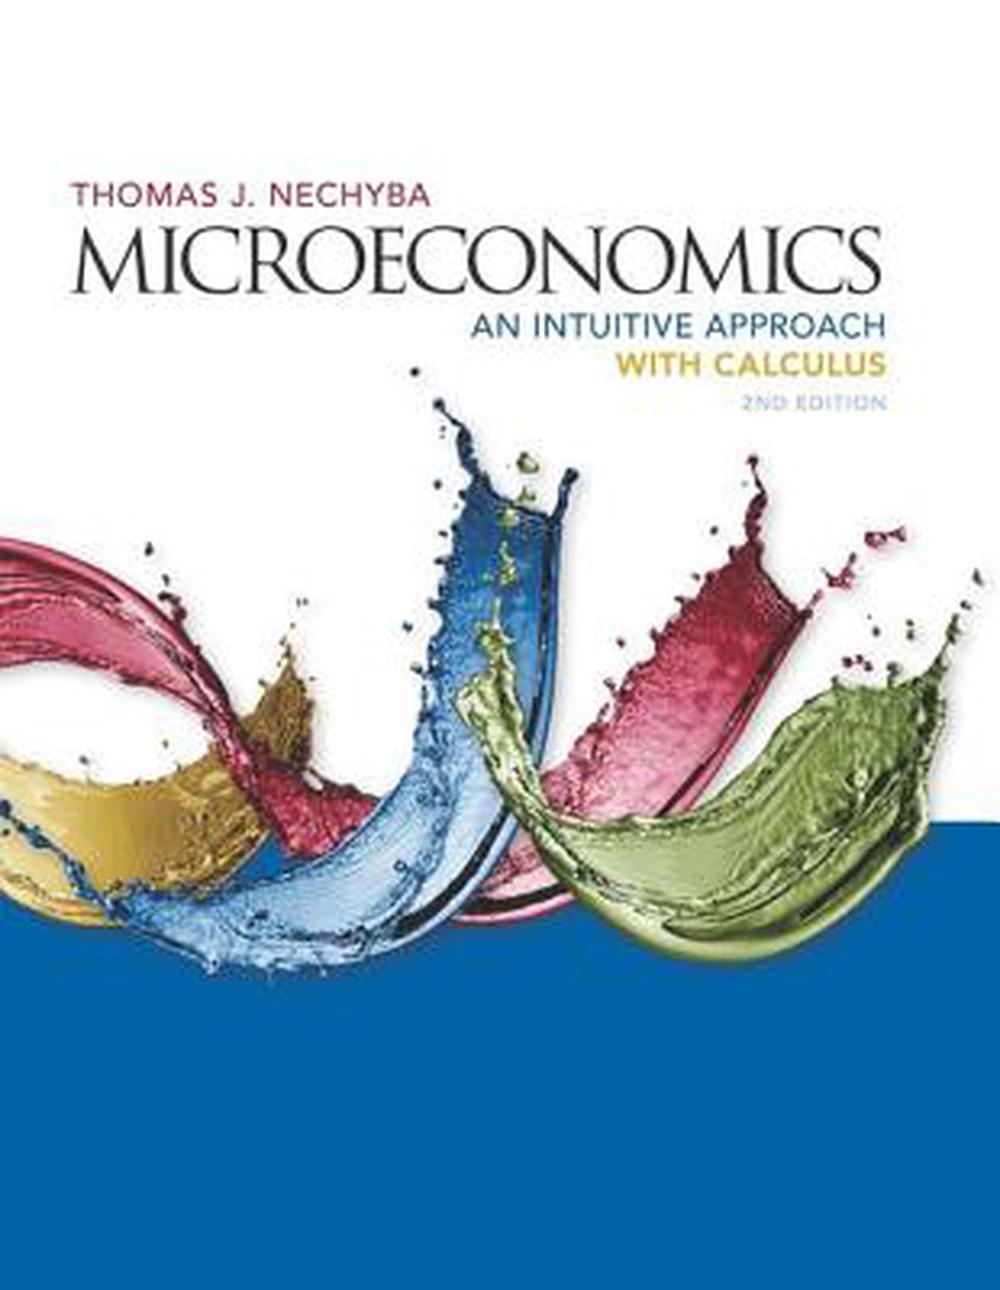 Microeconomics An Intuitive Approach with Calculus by Thomas Nechyba (English) 9781305650466 eBay